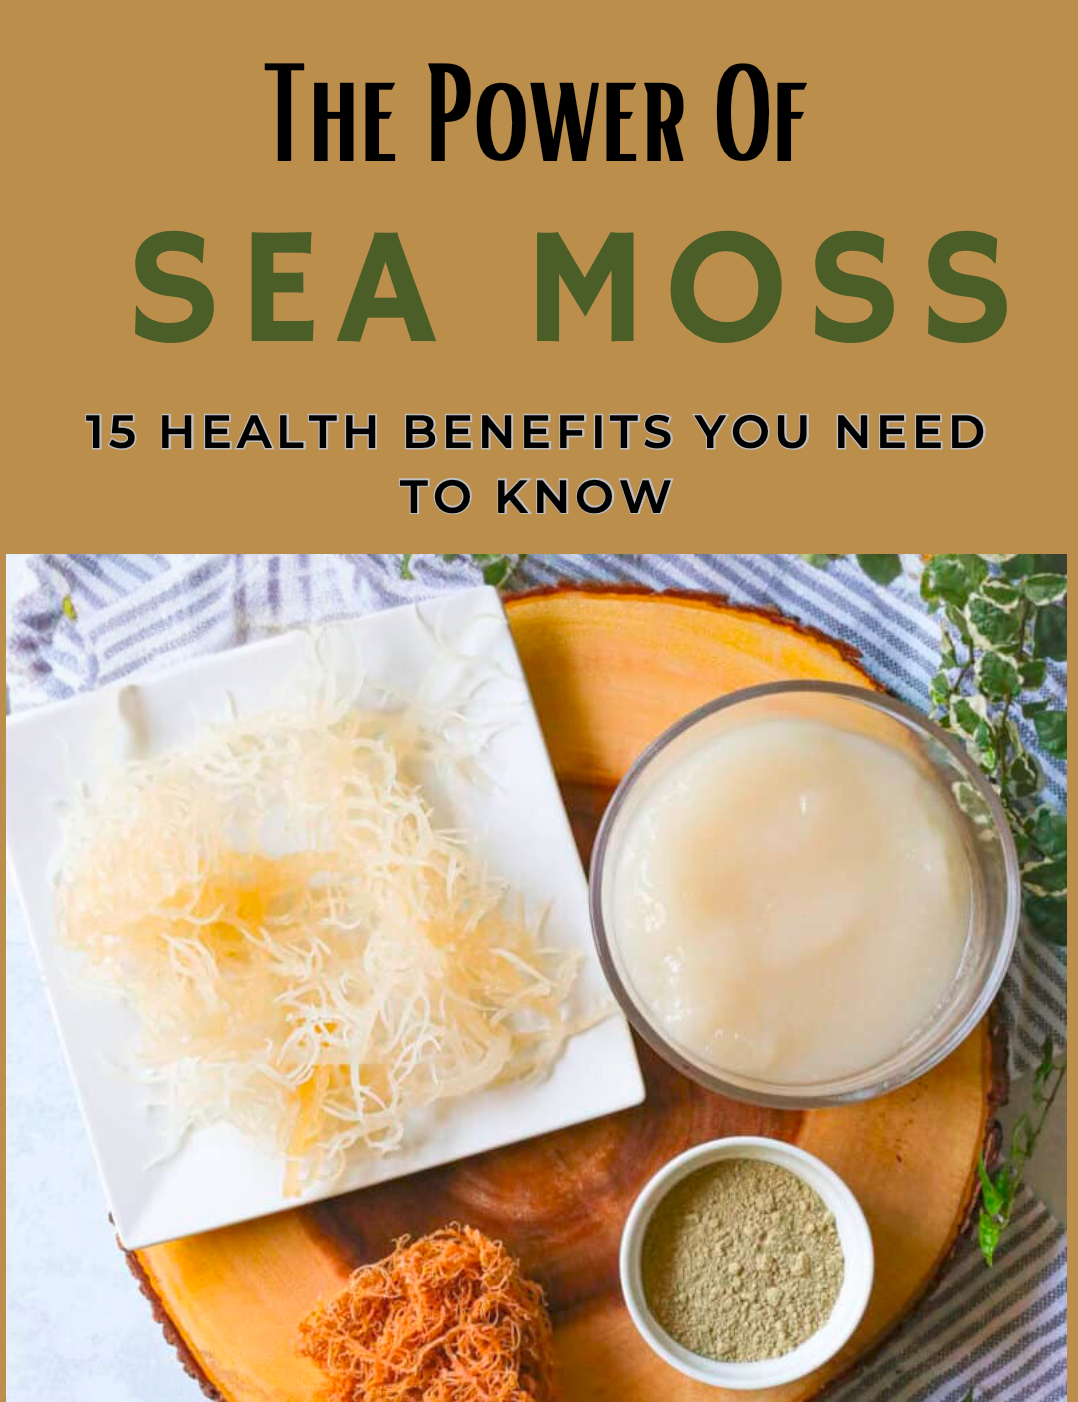 The Power Of Sea Moss - 15 Health Benefits You Need To Know (ebook)